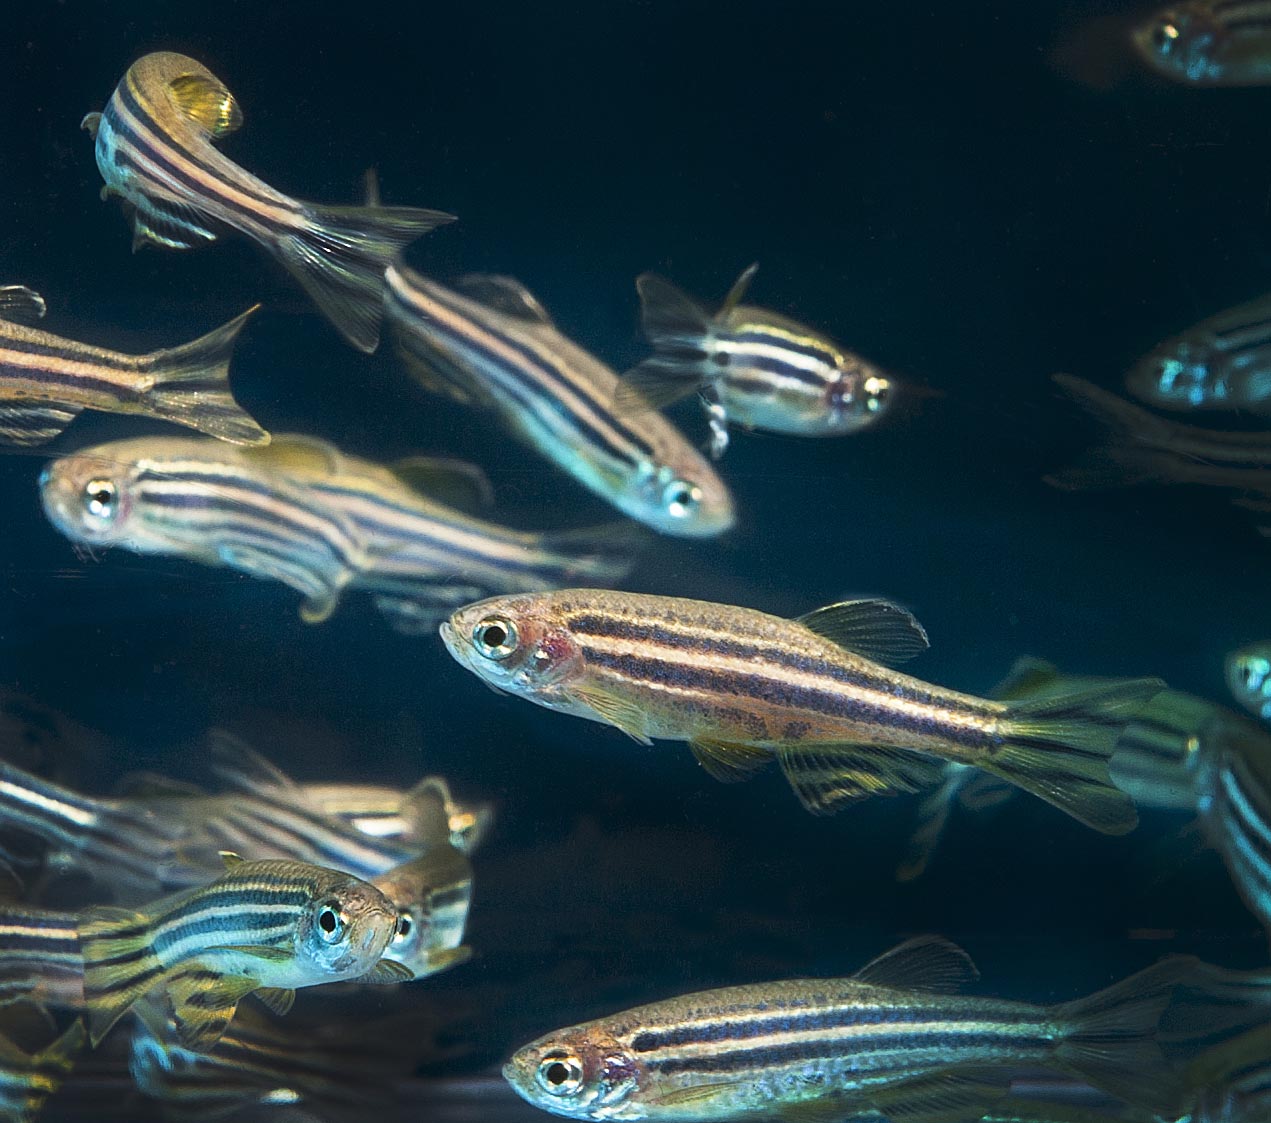 Social experiences impact zebrafish from an early age